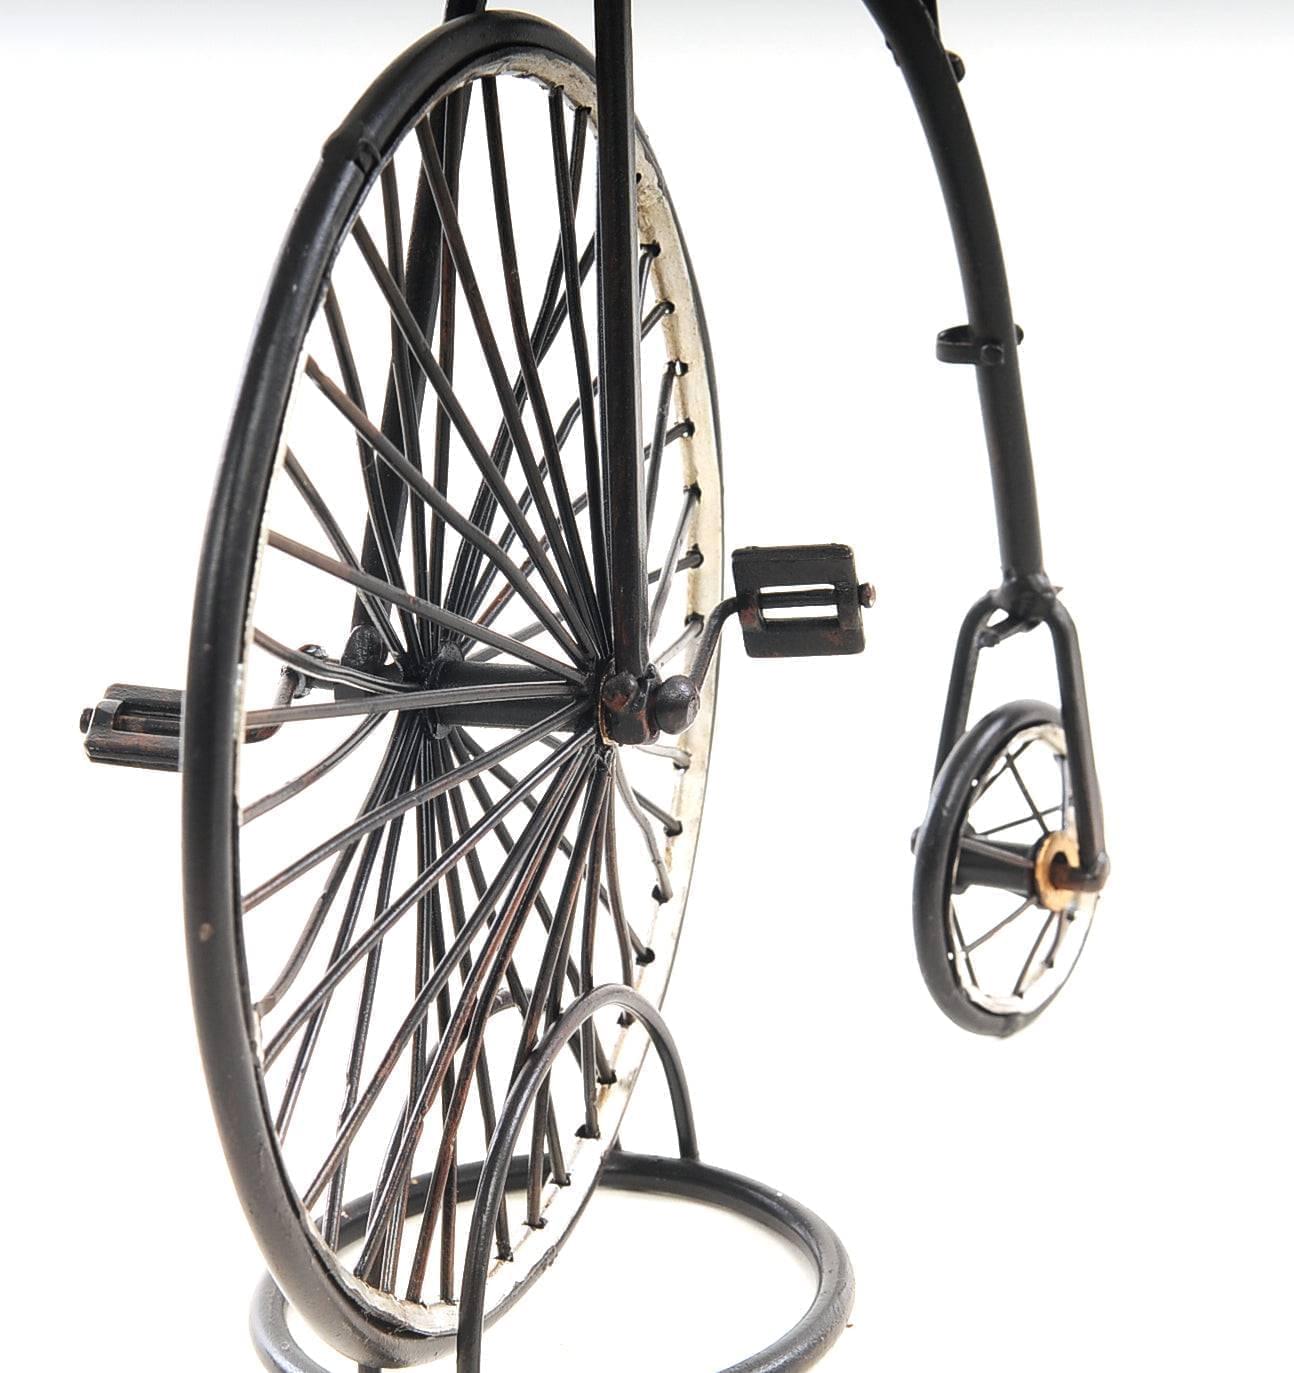 ALDO Decor > Artwork > Sculptures & Statues L: 9.5 W: 3.5 H: 8.5 Inches / NEW / metal 1870 The High Wheeler -Penny Farthing Car Metal Model